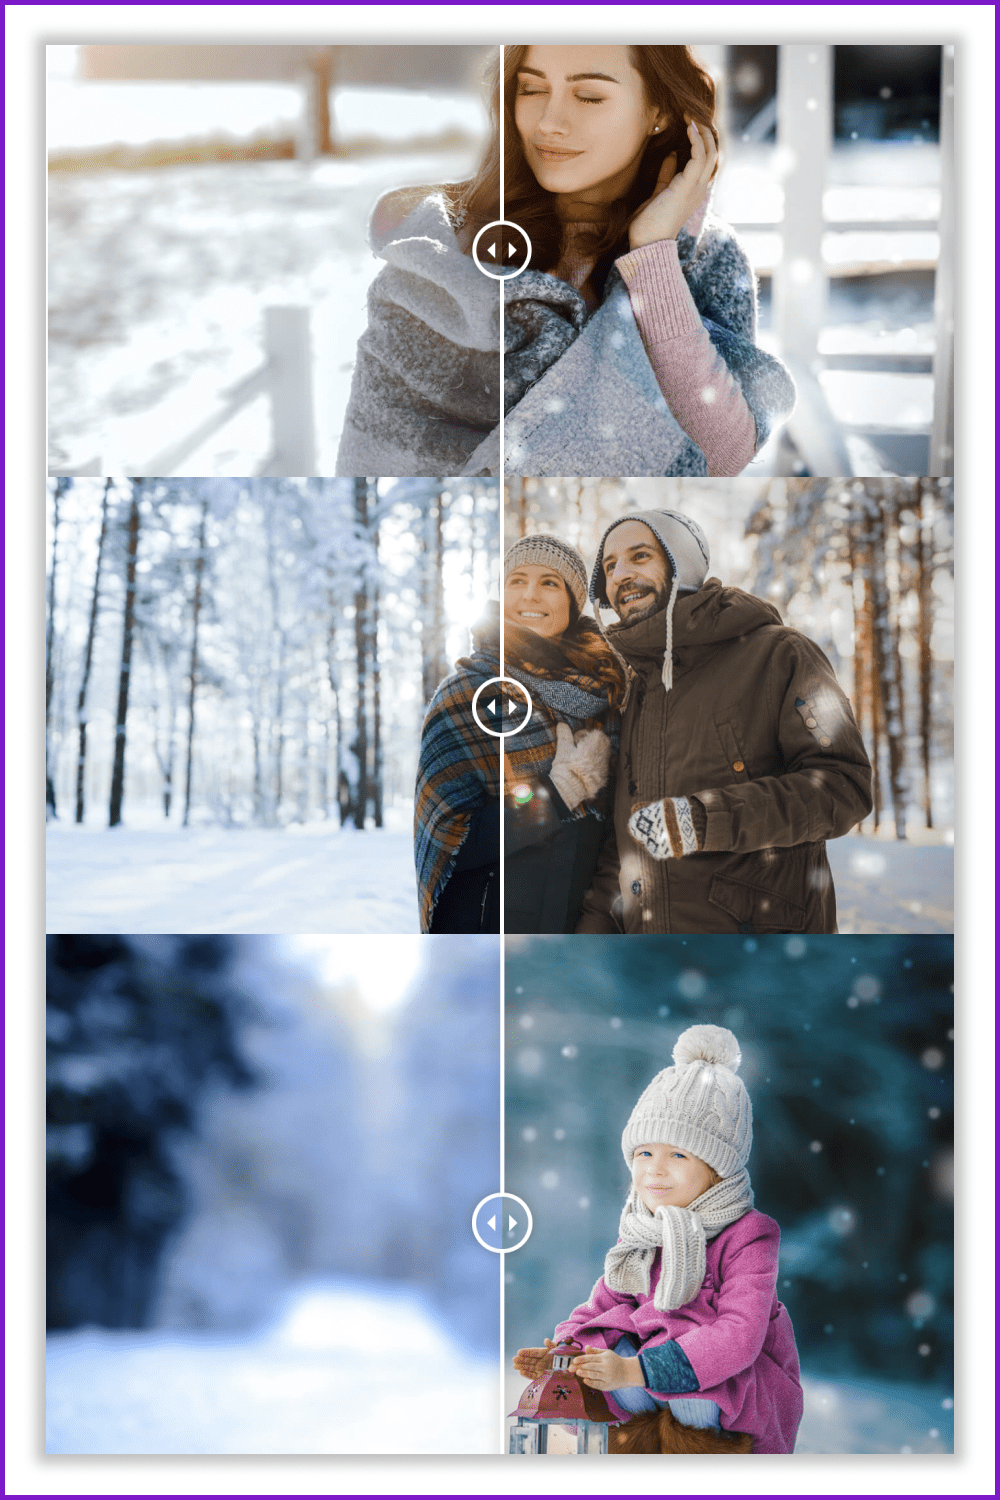 Collage of photos of people in winter with different color settings.